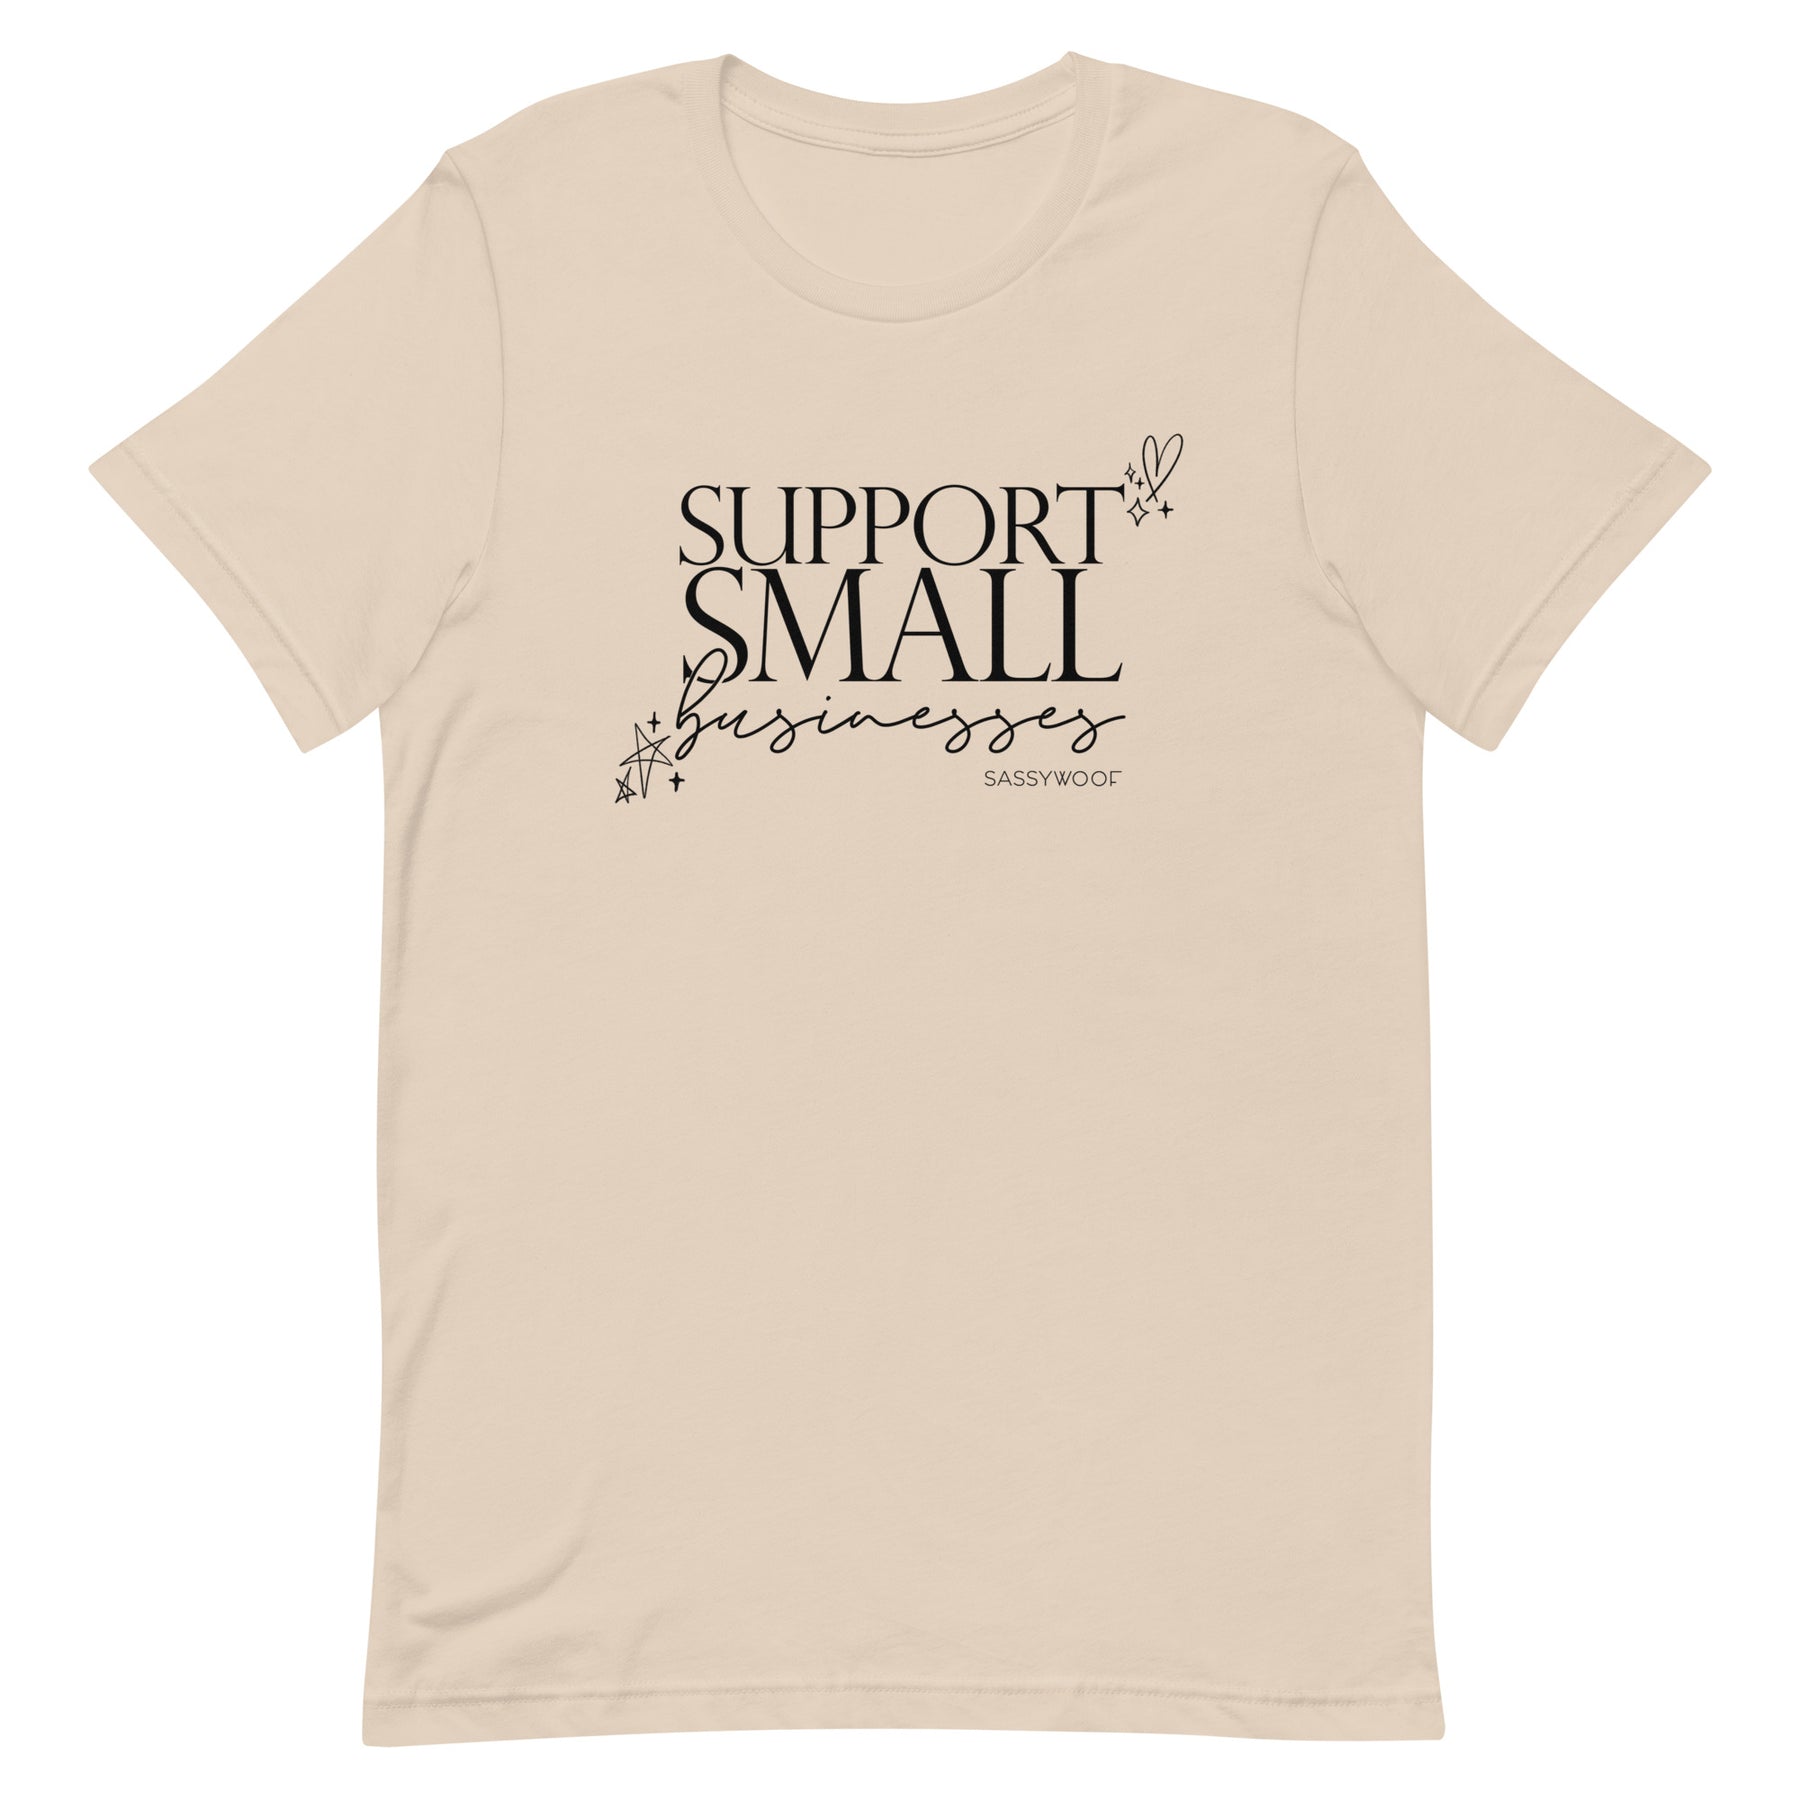 Support Small Businesses Tee